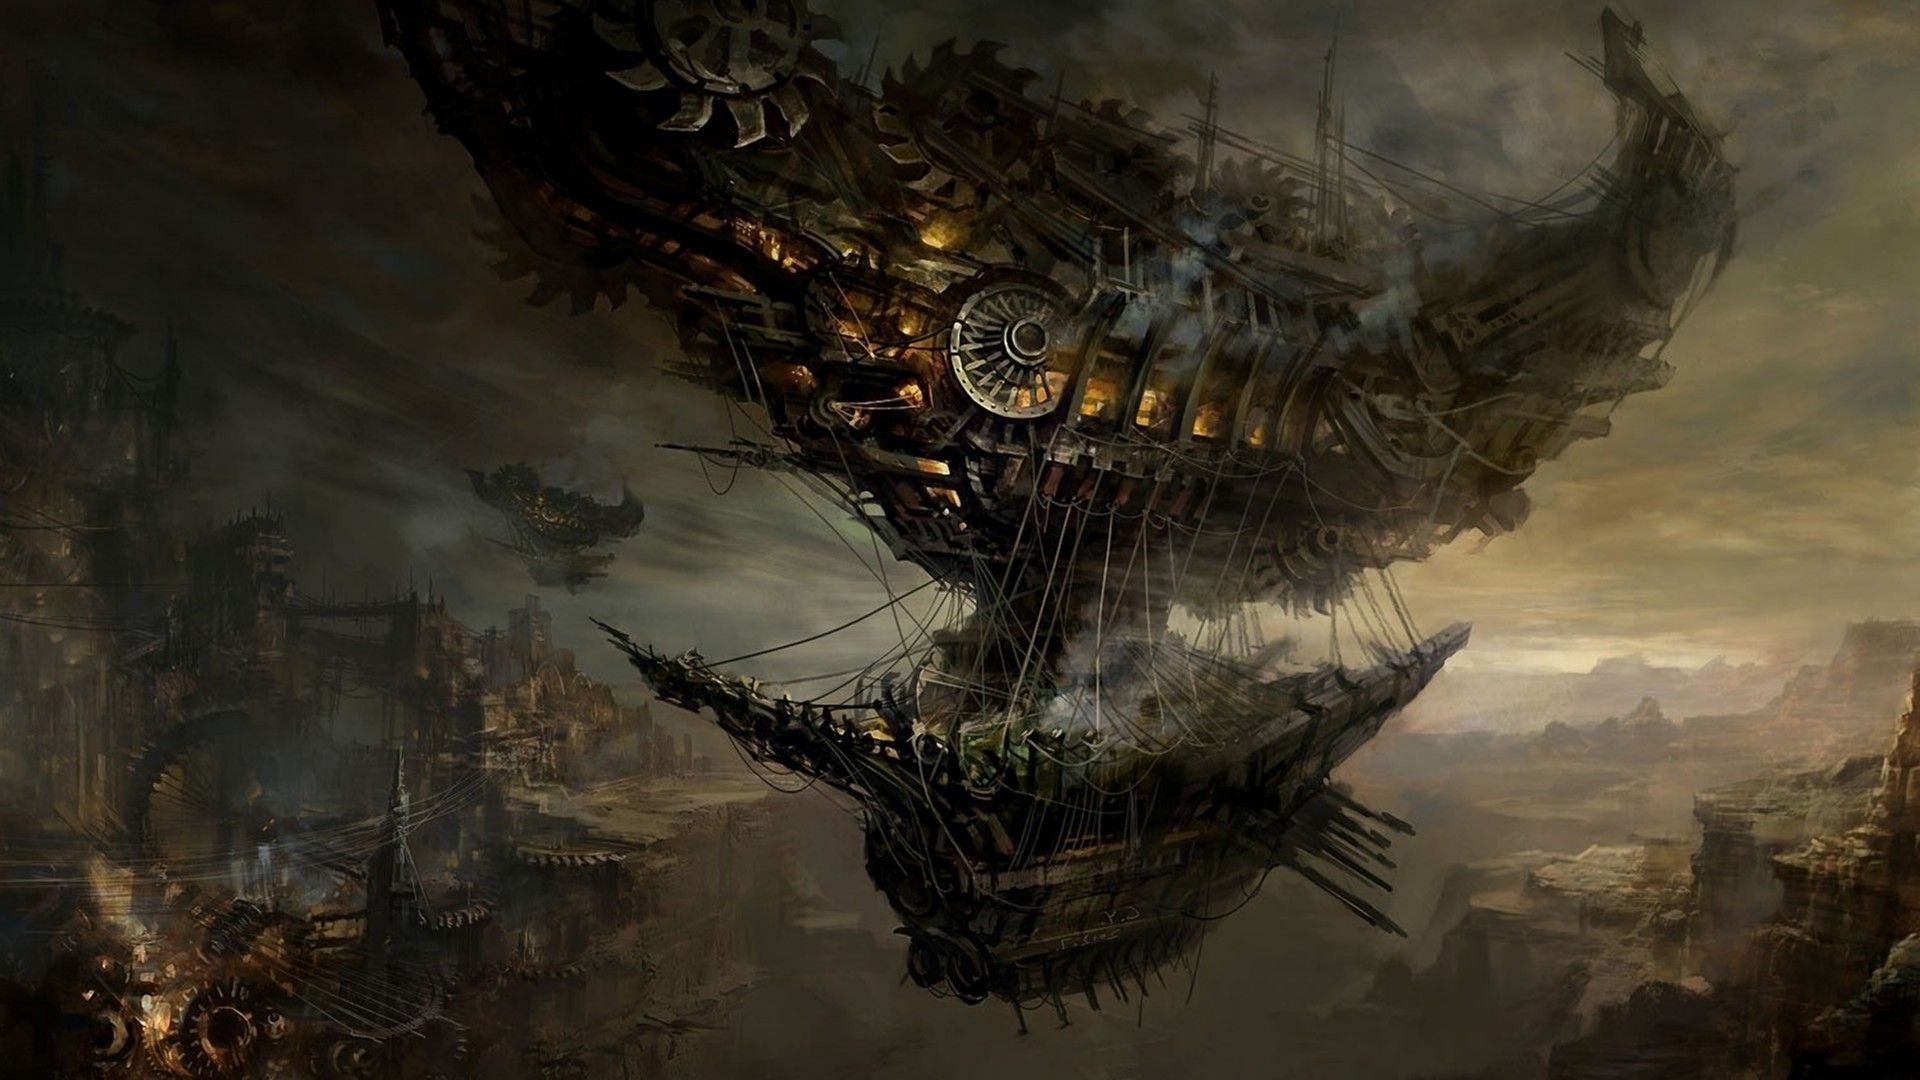 Steampunk 4K wallpapers for your